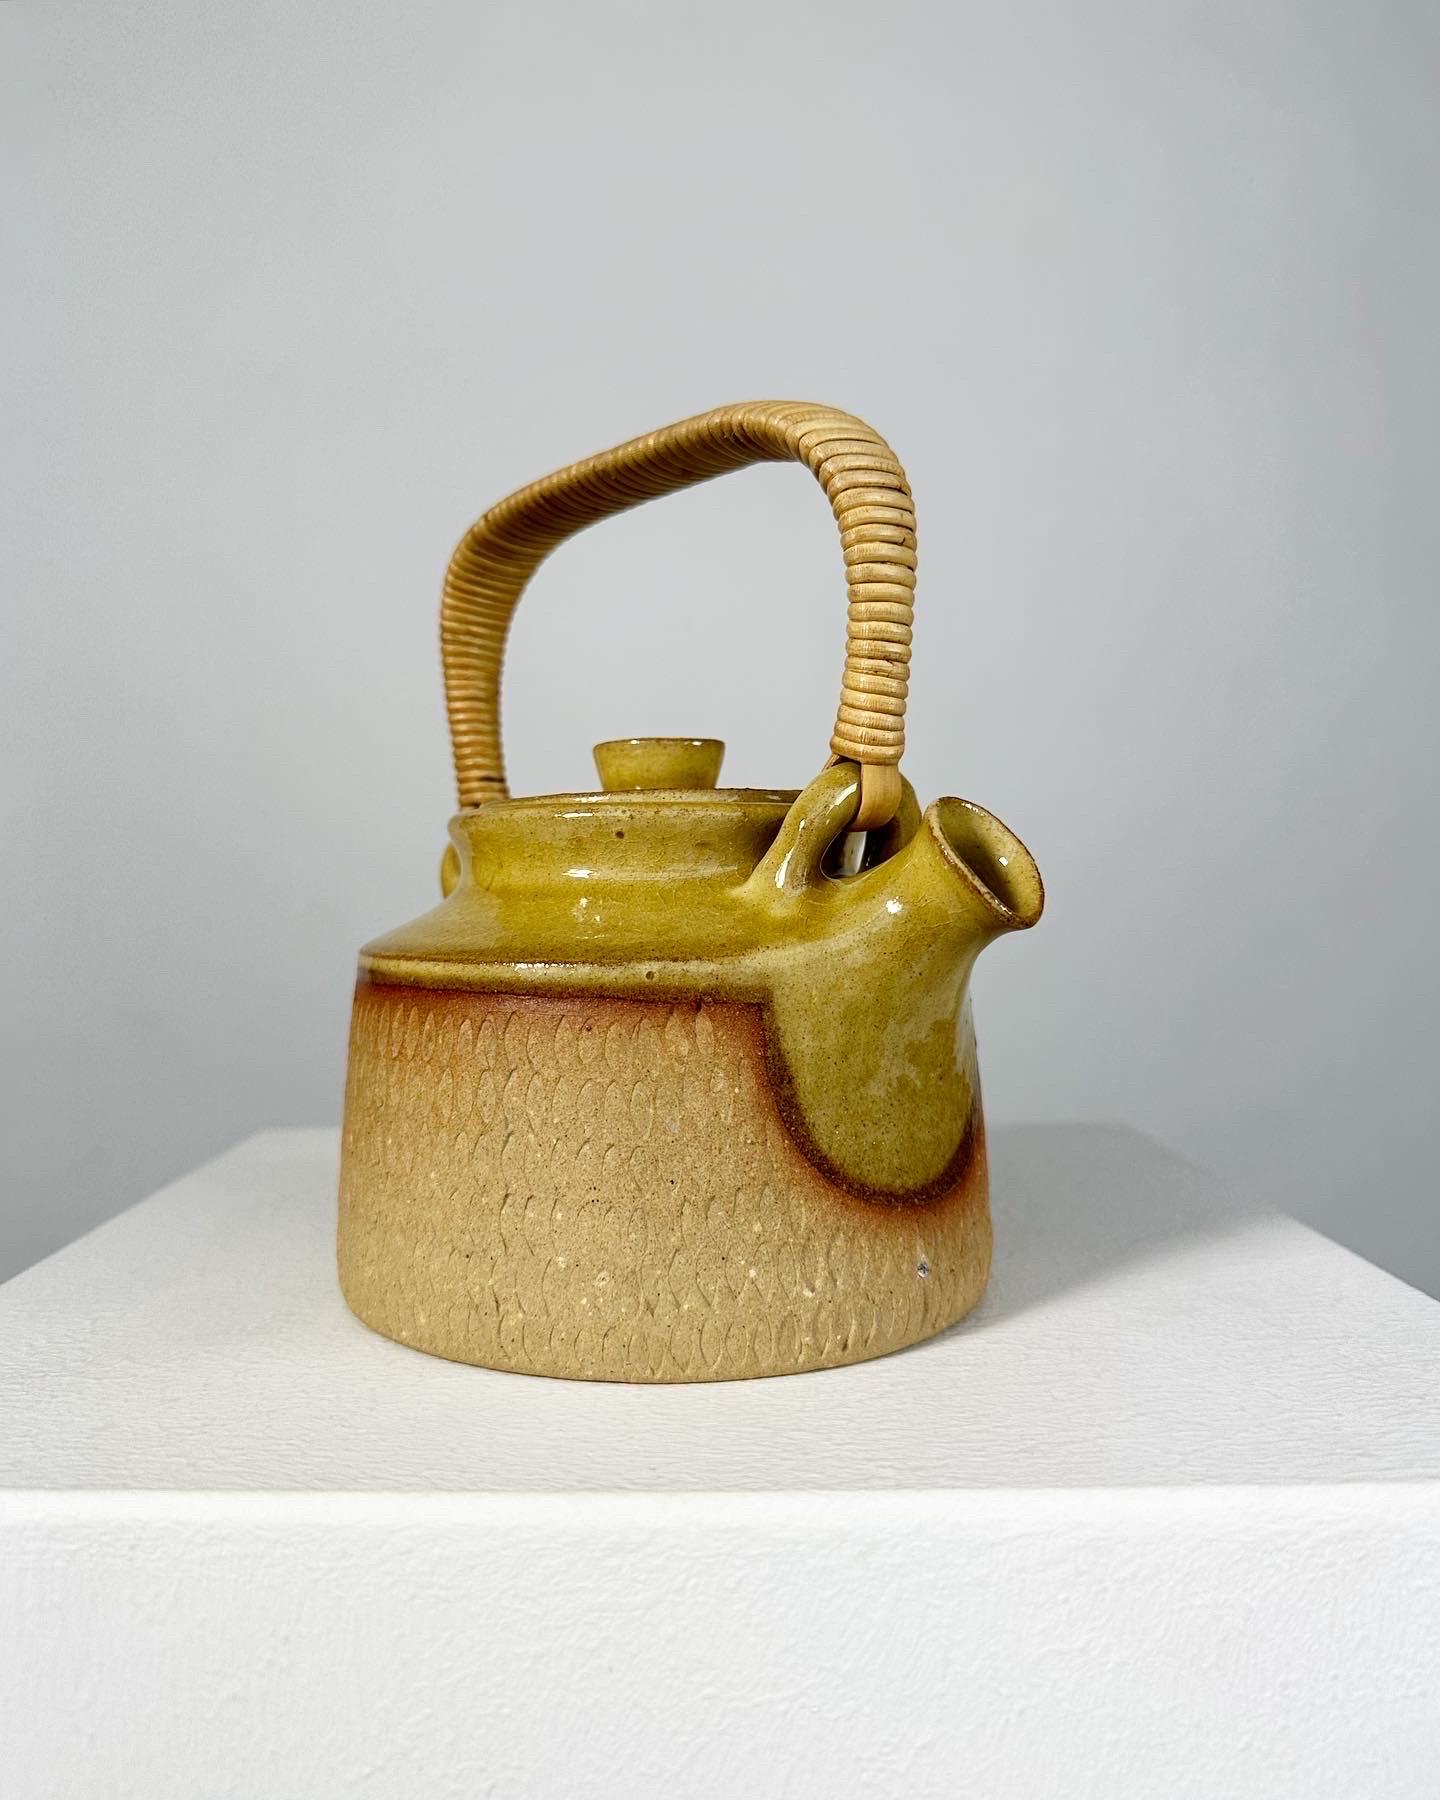 Hand-Crafted Signe Persson Melin Teapot Relief Pattern Woven Cane Handle Sweden 1950s For Sale